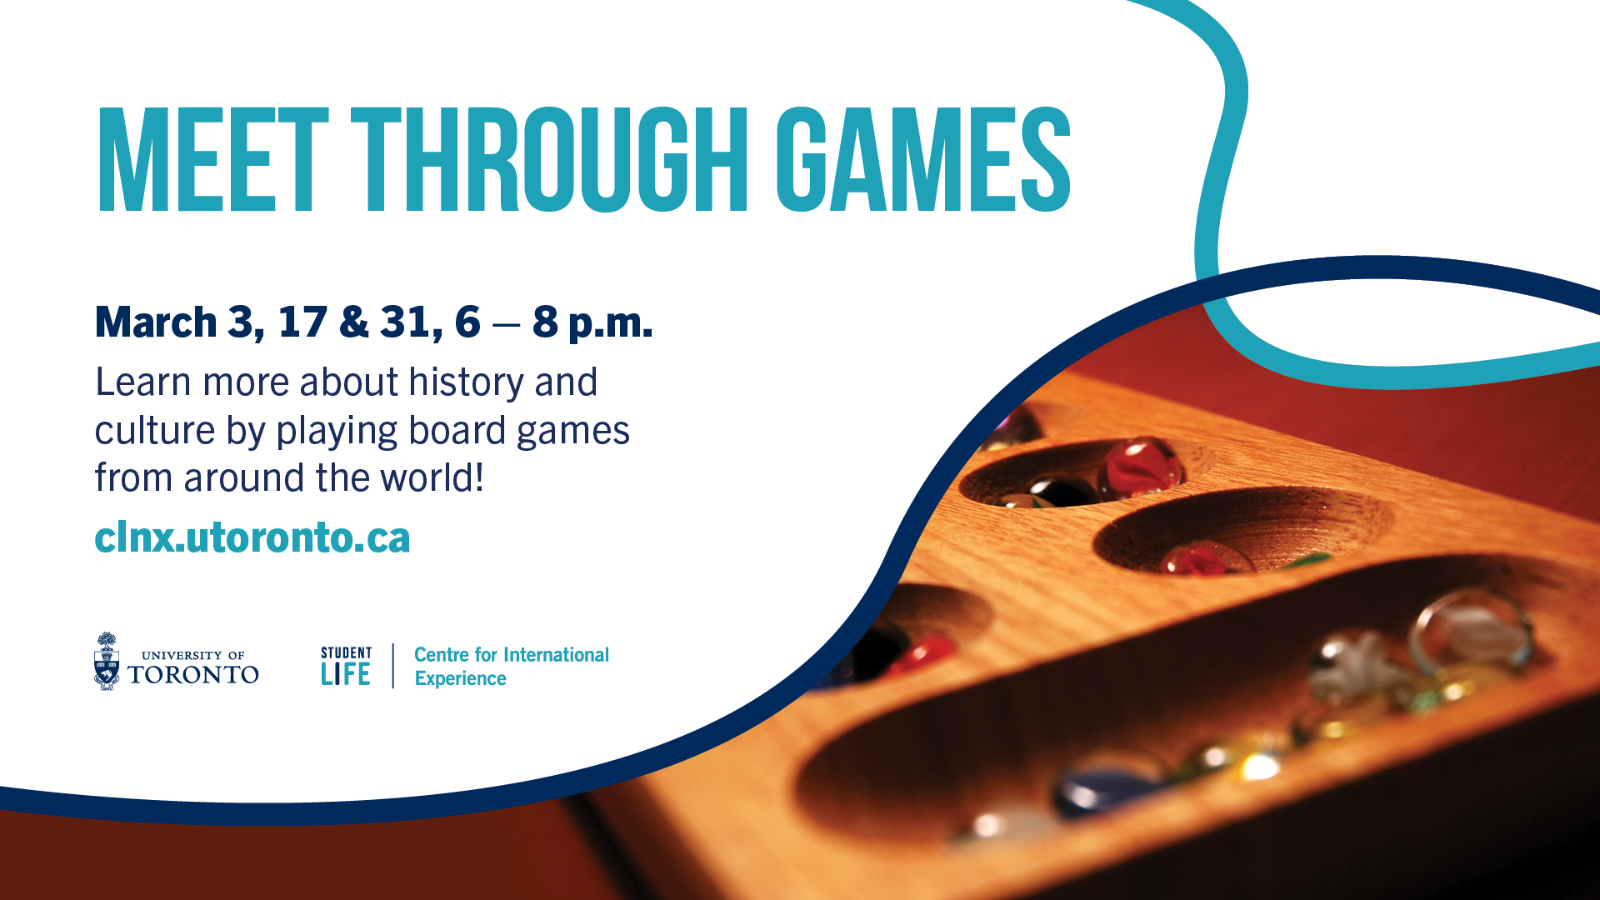 A photo of mancala/congkak with text "Meet Through Games; March 3, 17, 31, 6-8 p.m.; Learn more about history and culture by playing board games from around the world. clnx.utoronto.ca" 